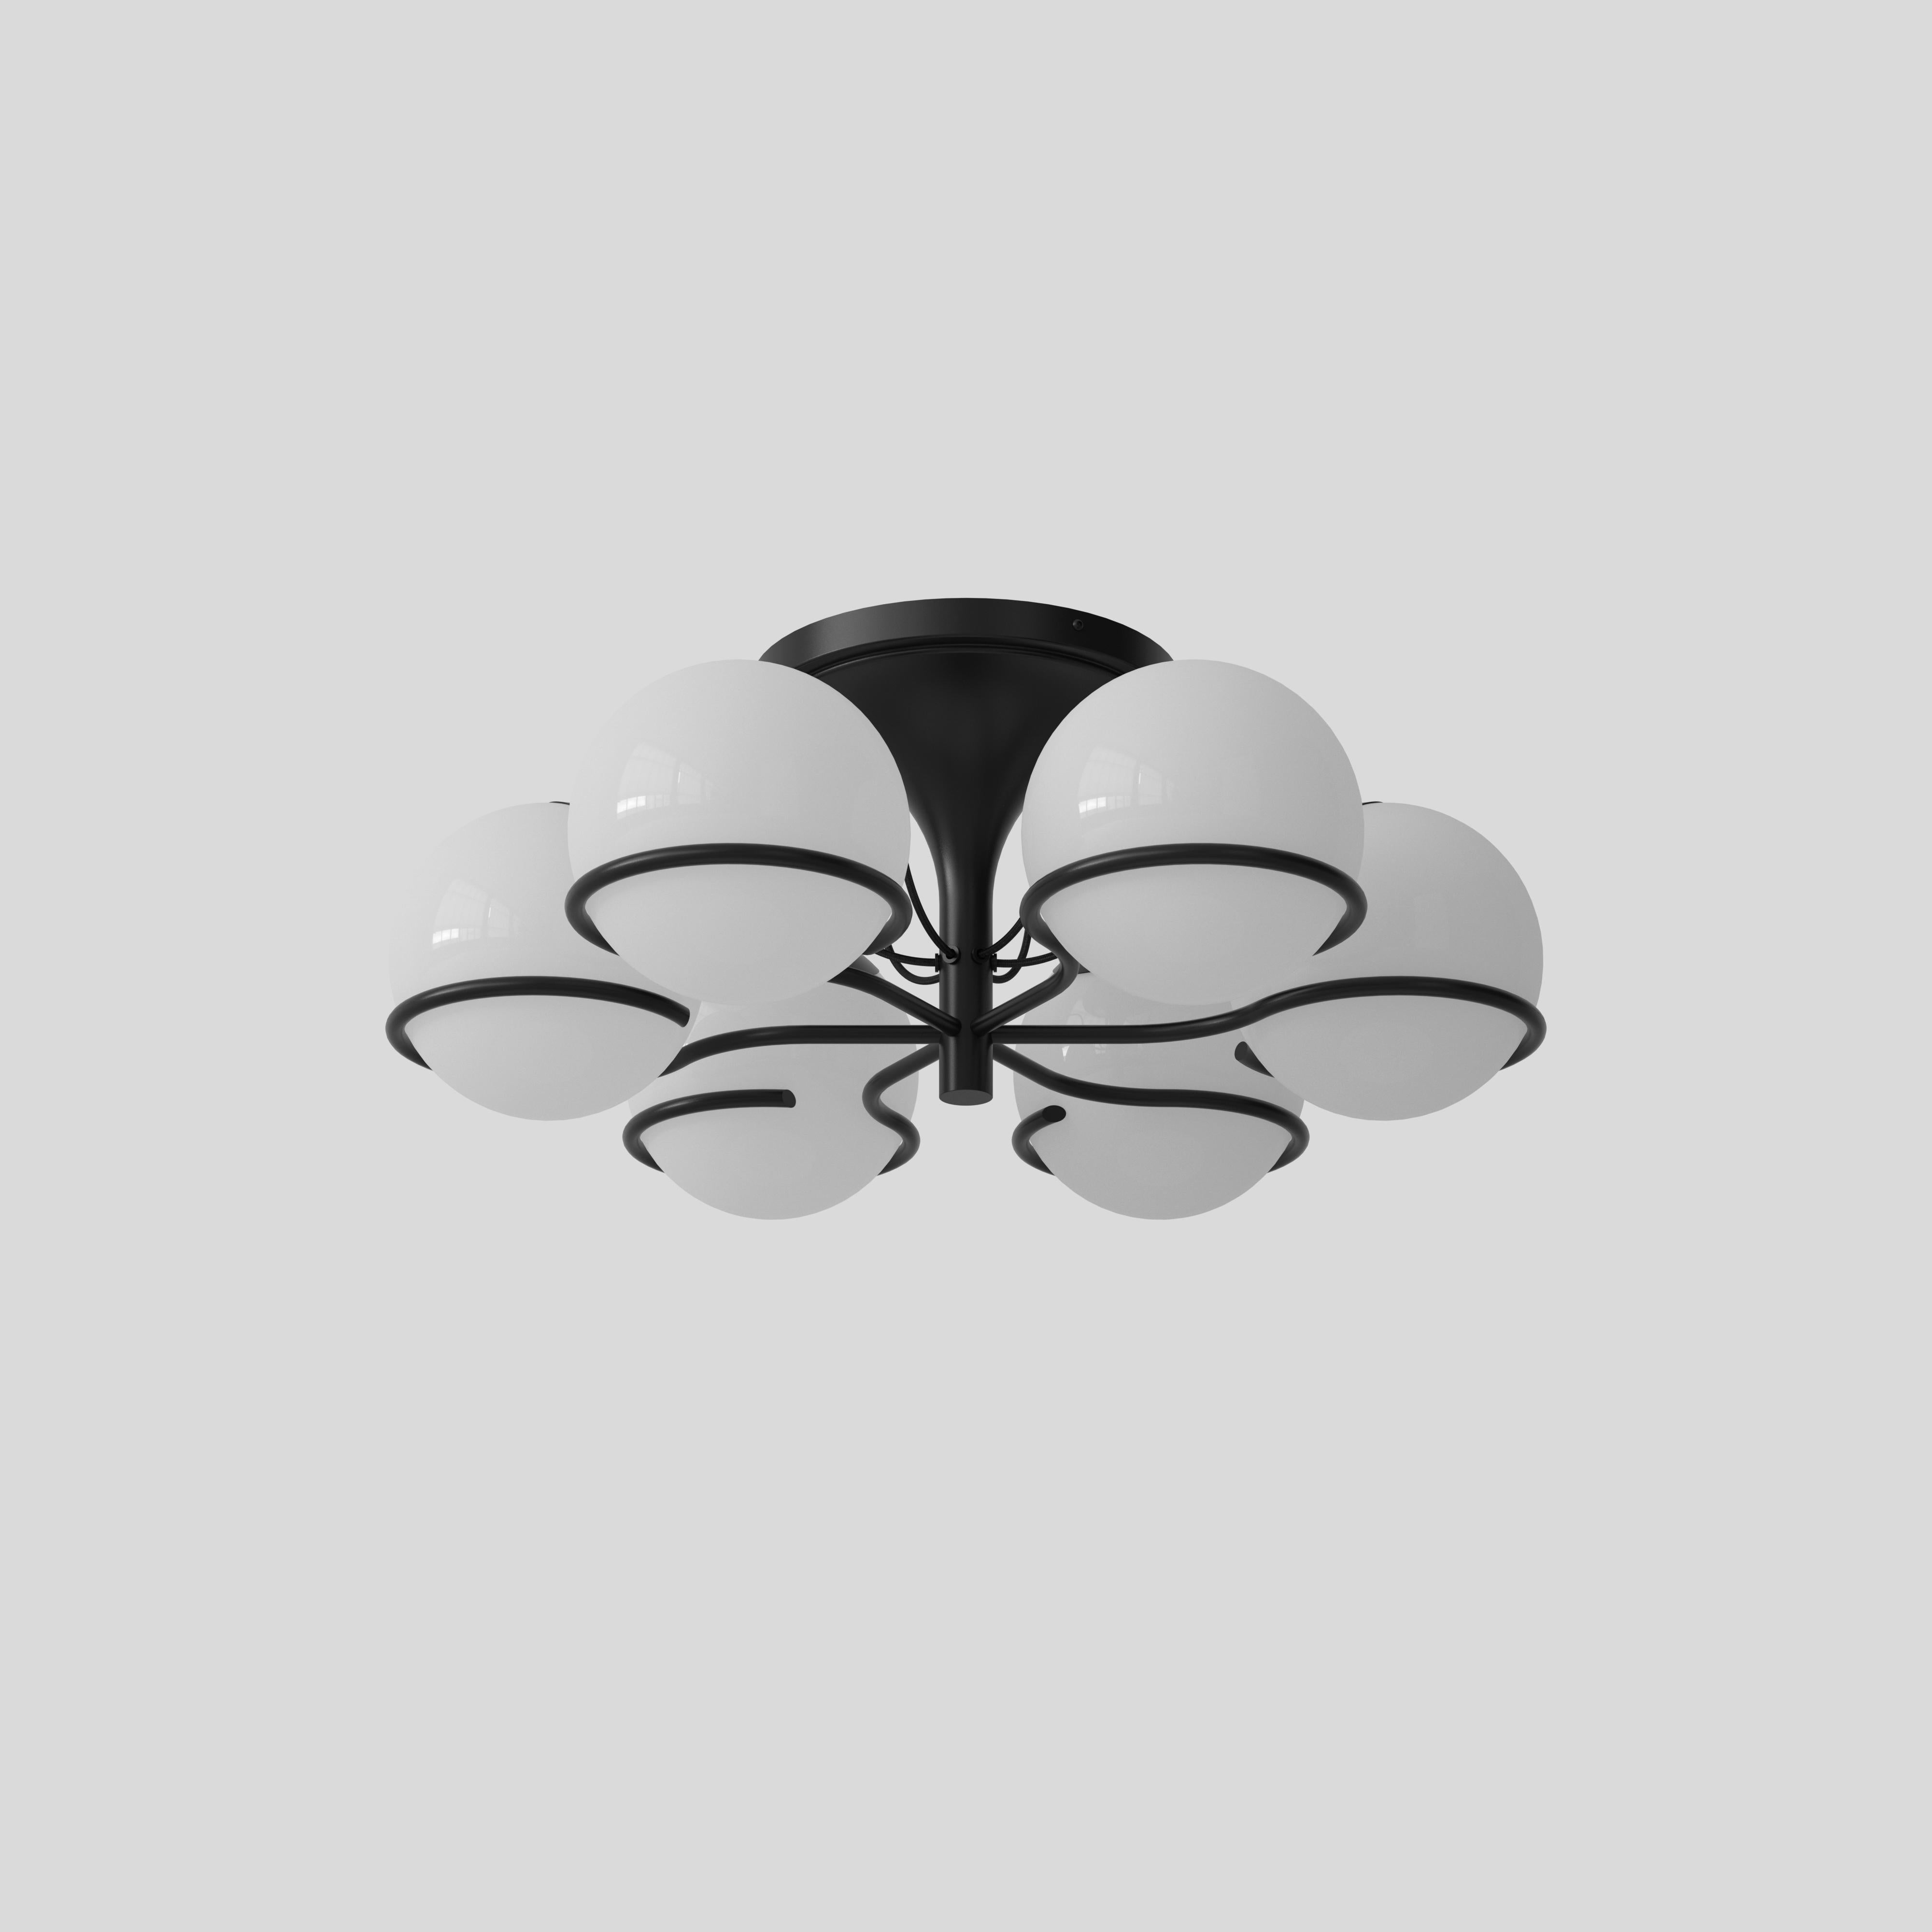 Model 2042/6
Design by Gino Sarfatti
With Le Sfere Plafone, Model 2042/6 from 1963, another of Gino Sarfatti’s beautiful interpretations of the luminous sphere is reintroduced. The refined ceiling light is composed of six blown opaline glass